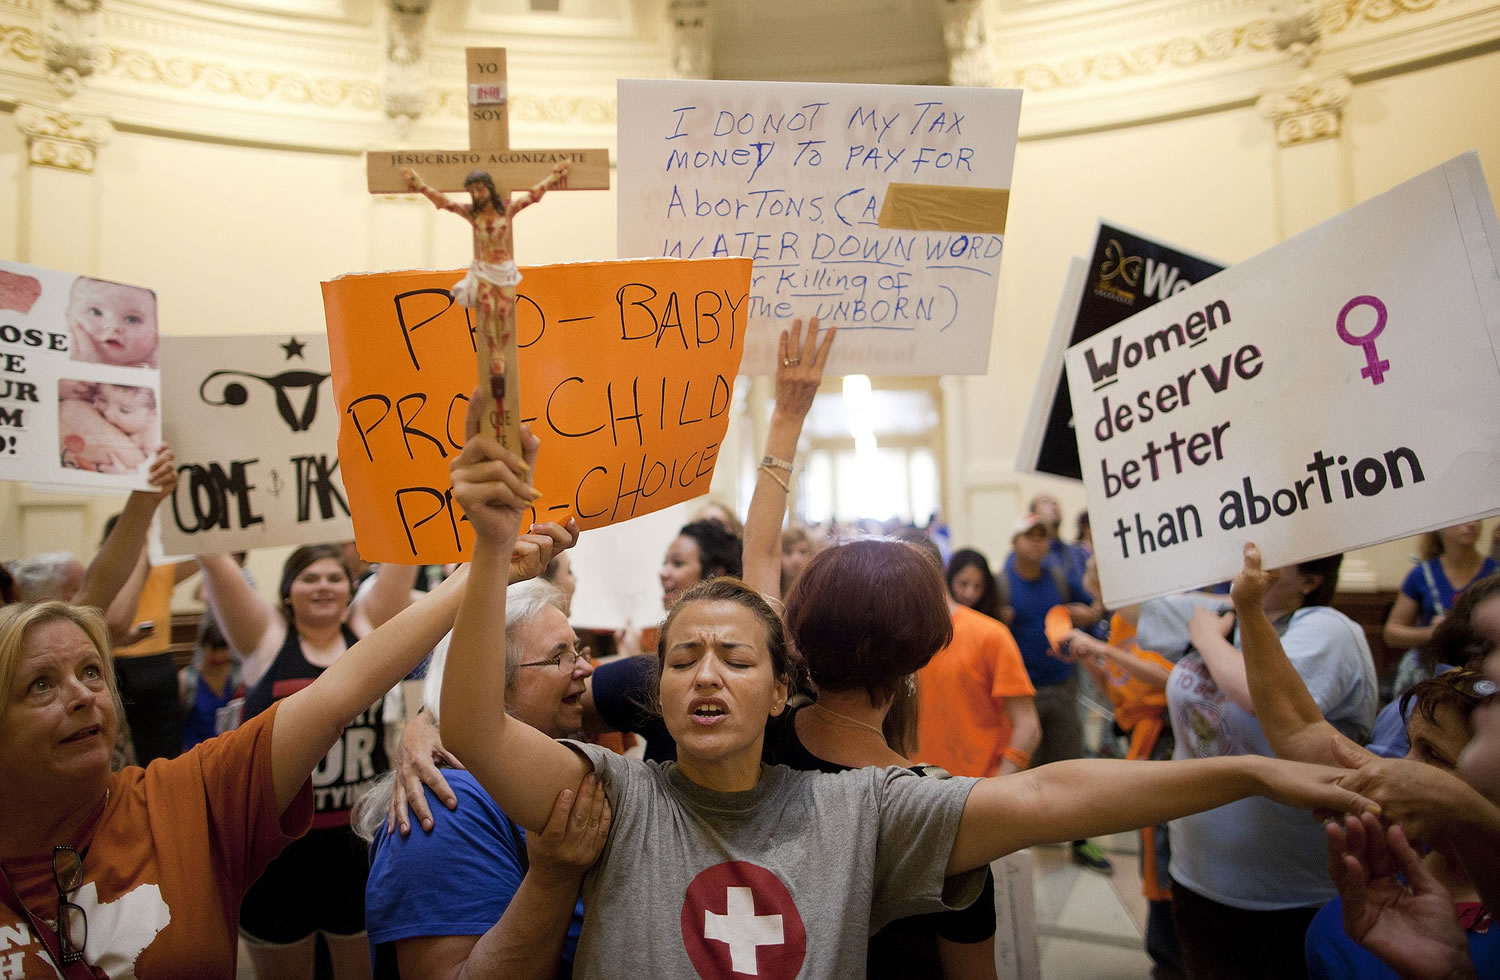 Anti-abortion rights supporter Katherine Aguilar holds a crucifix and prays while opponents and supporters of abortion rights gather in the State Capitol rotunda in Austin, Texas, on July 12, 2013.